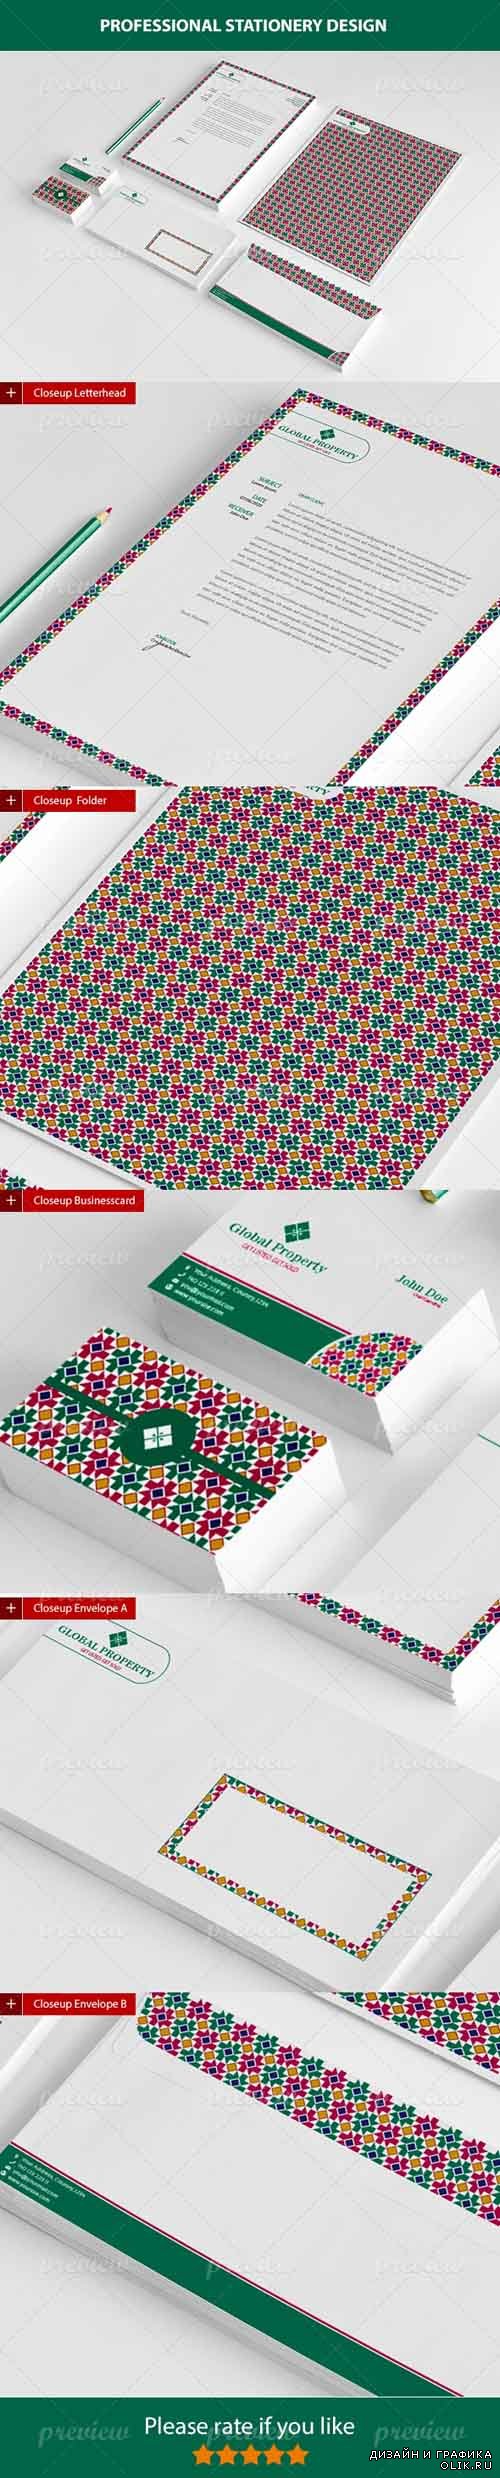 Vector Global Property Stationery Template